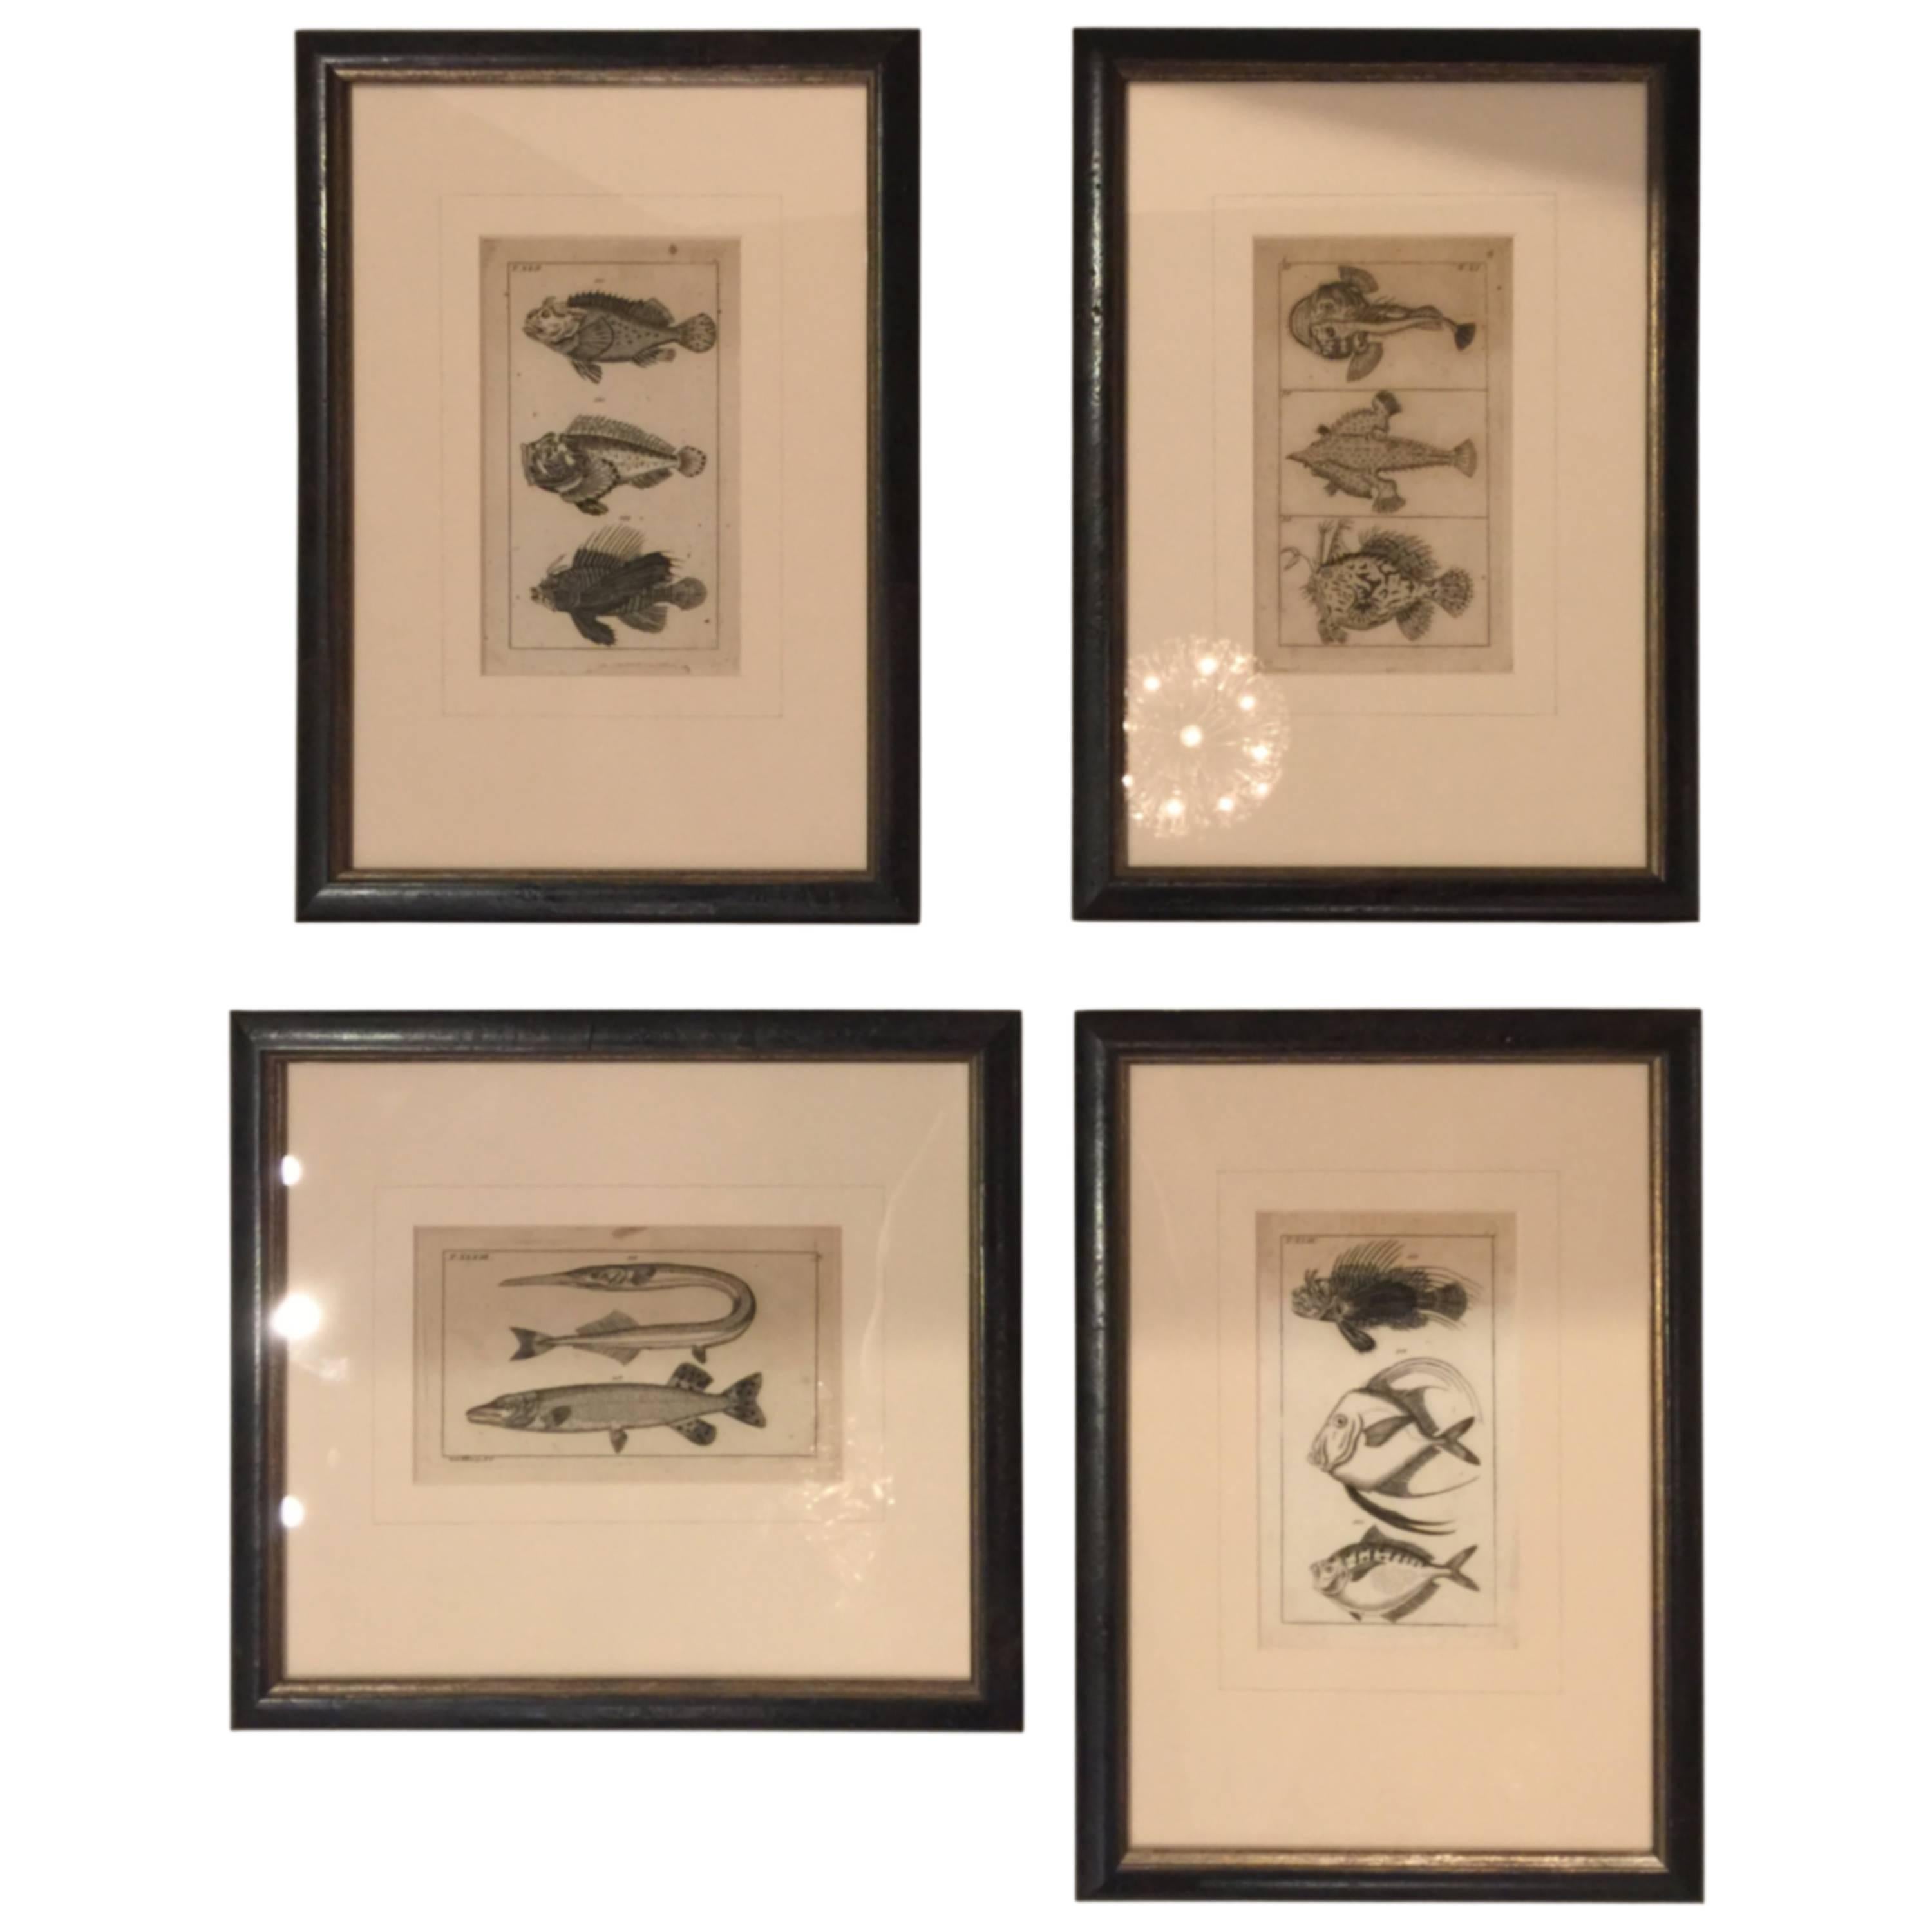 Collection of Four Wood Block Prints of Fish, 19th Century